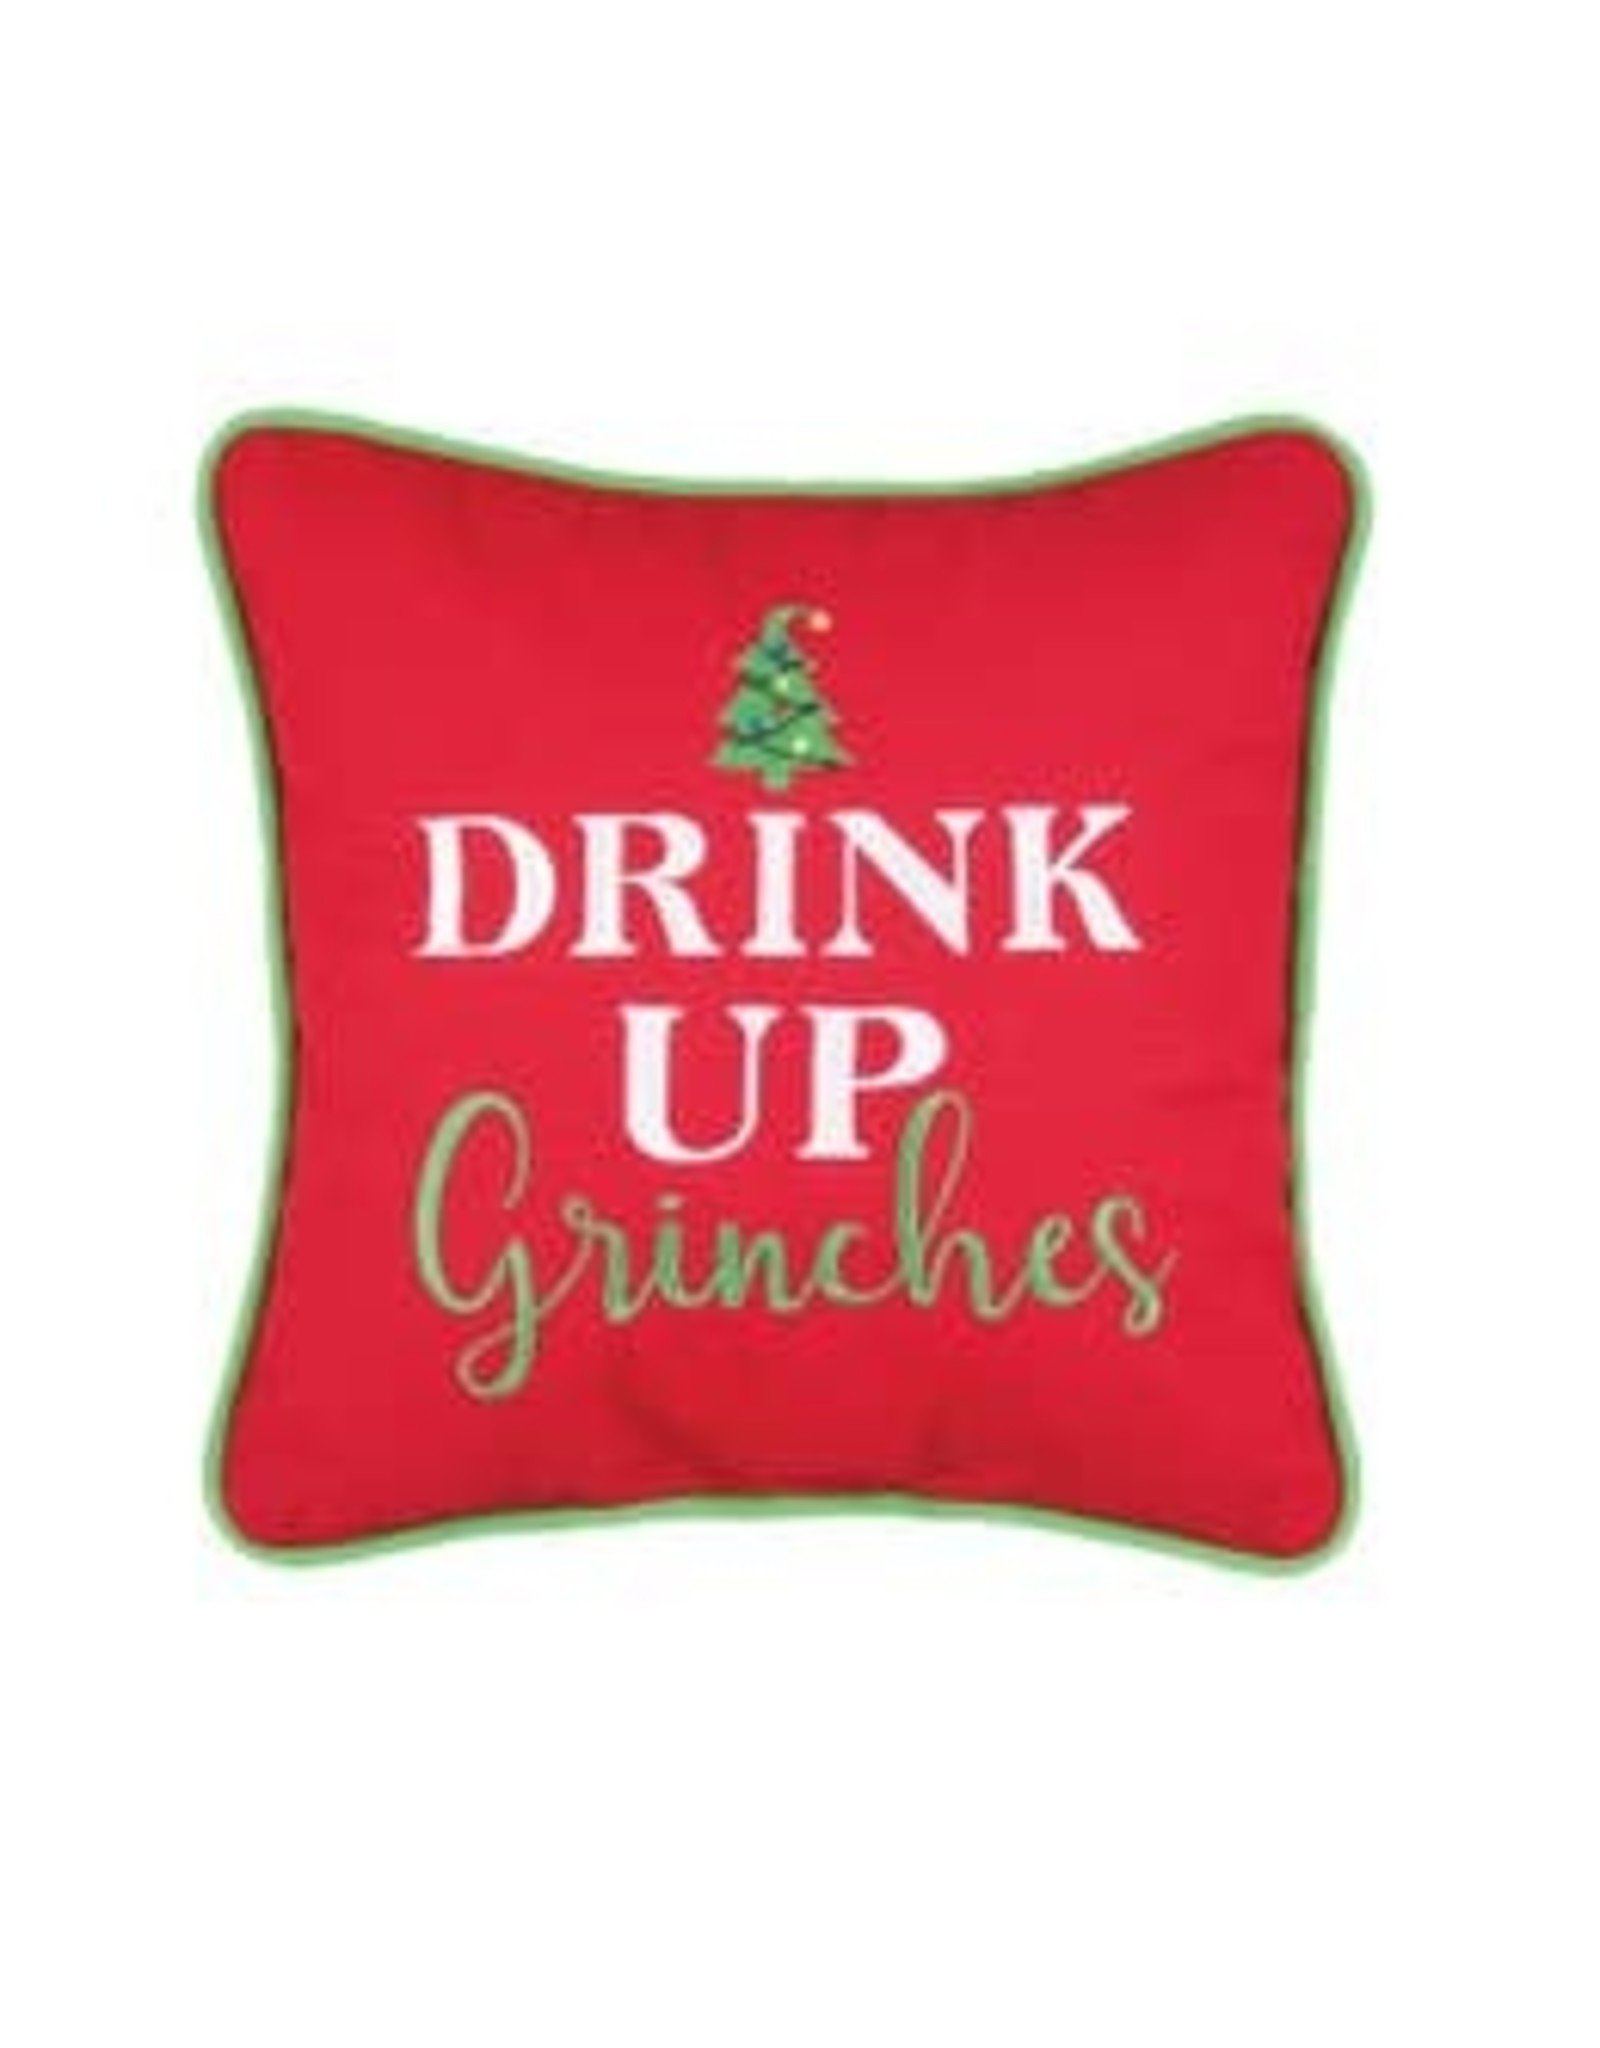 Drink Up Grinches-10x10 Gift Pillow